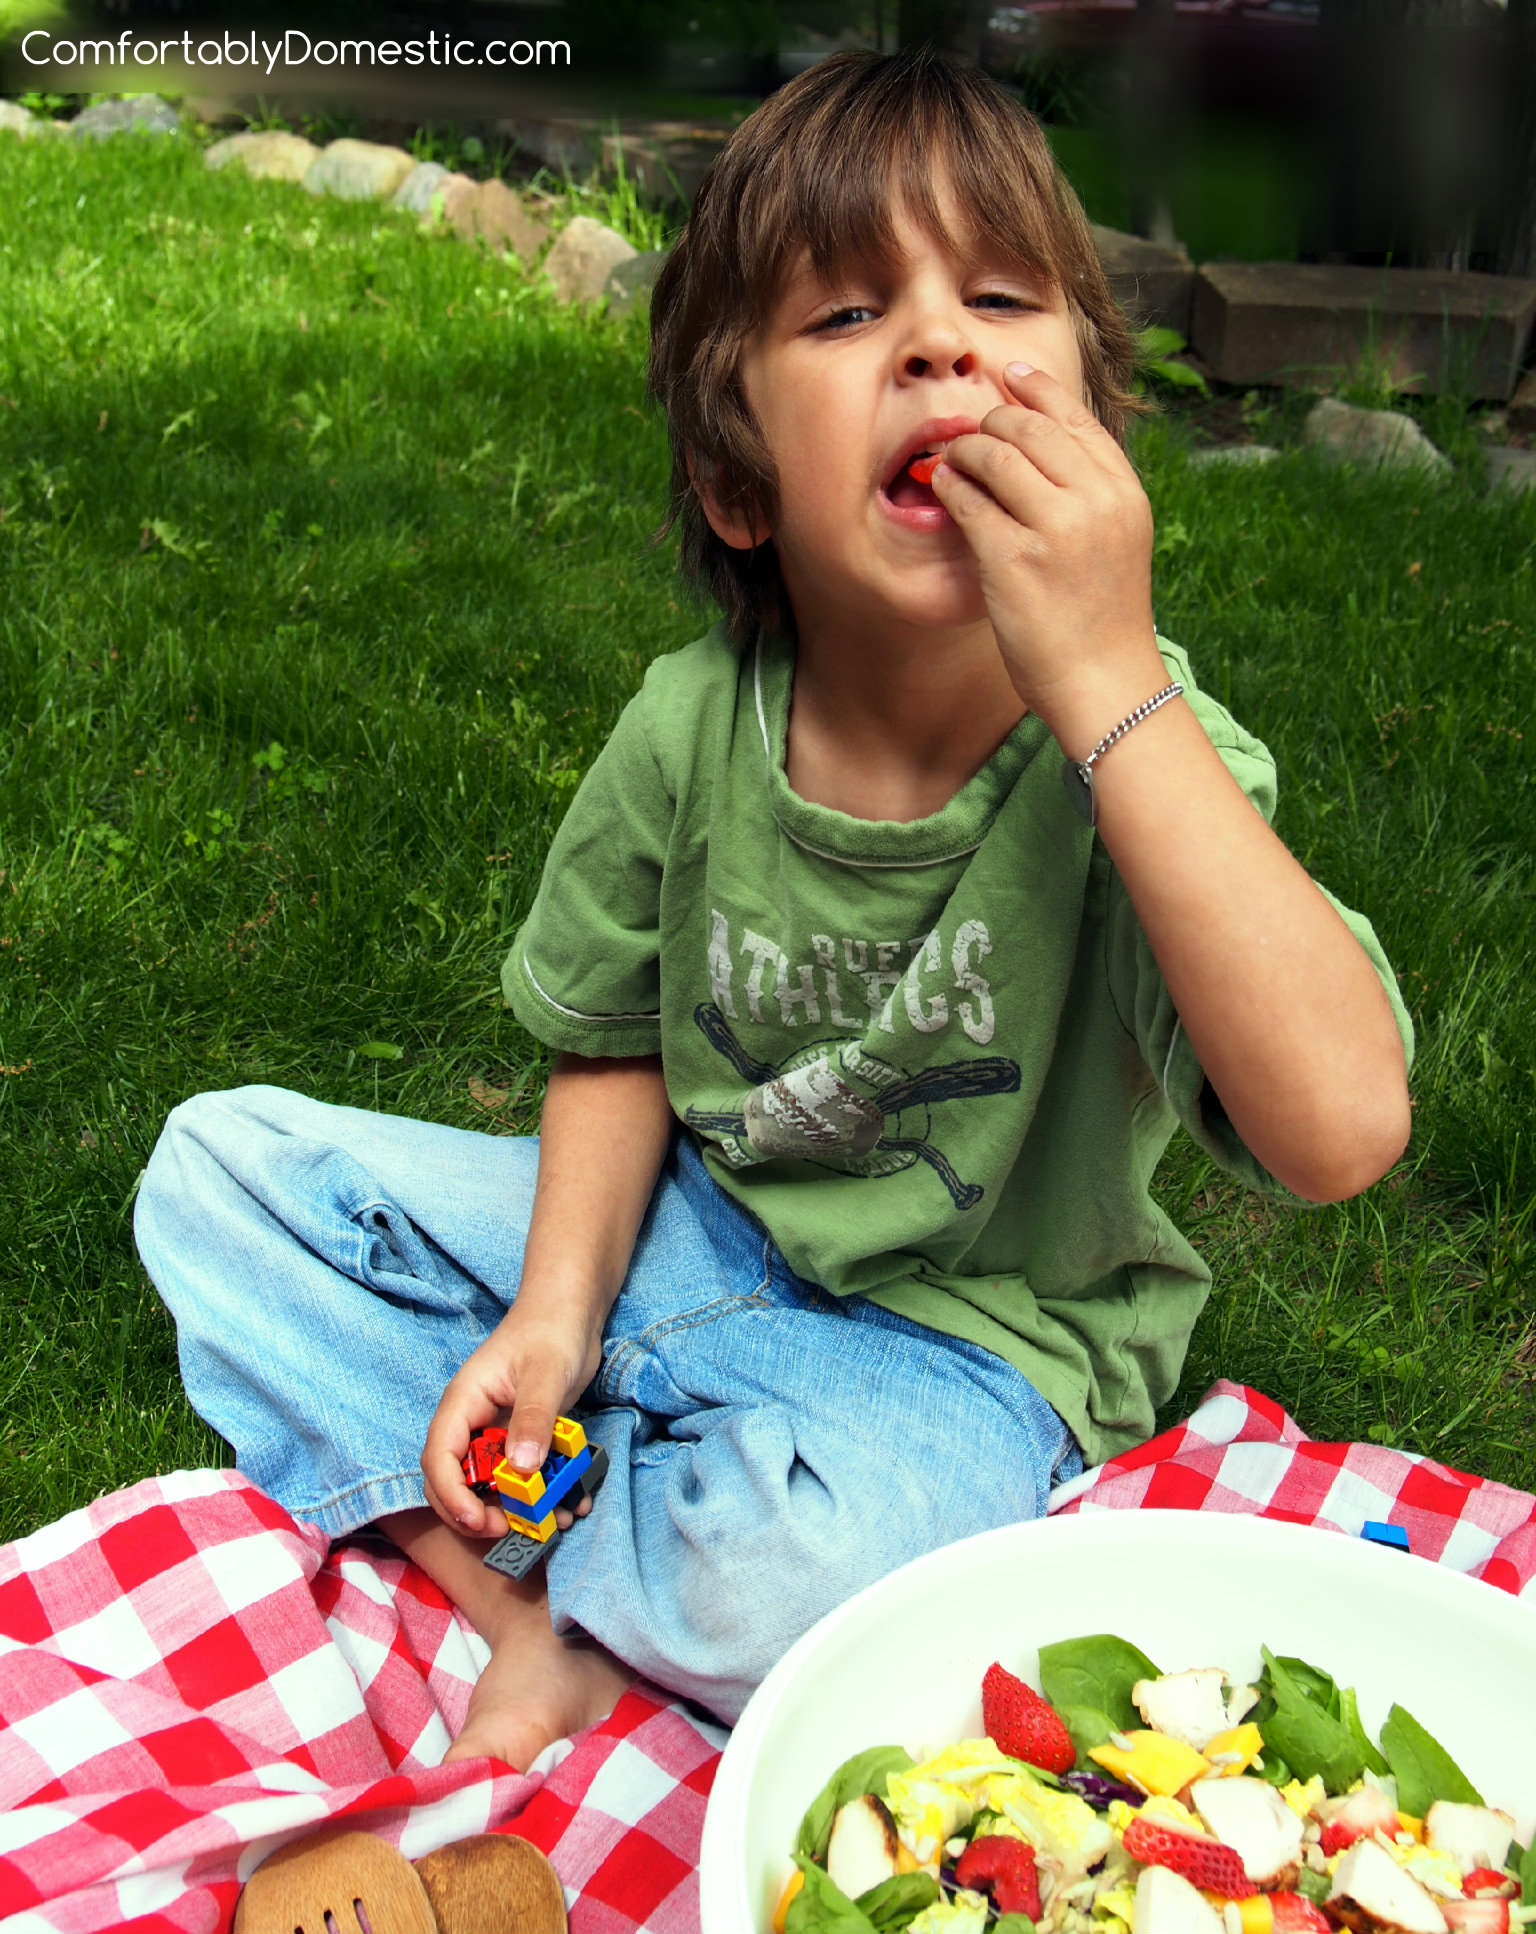 The Baby plucking strawberries out of the salad.